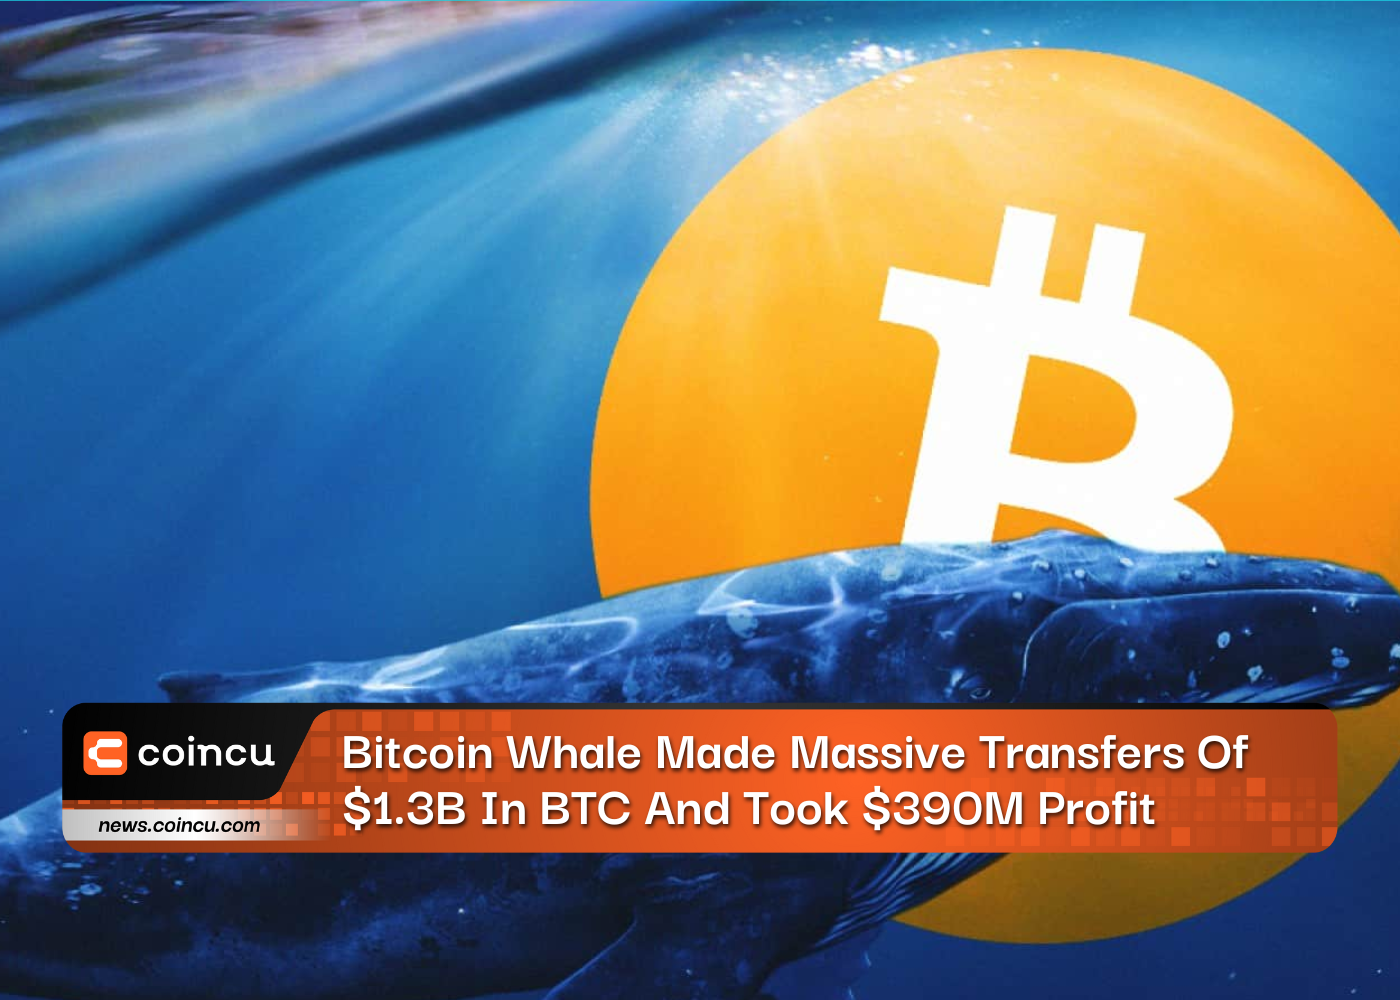 Bitcoin Whale Made Massive Transfers Of $1.3B In BTC And Took $390M Profit